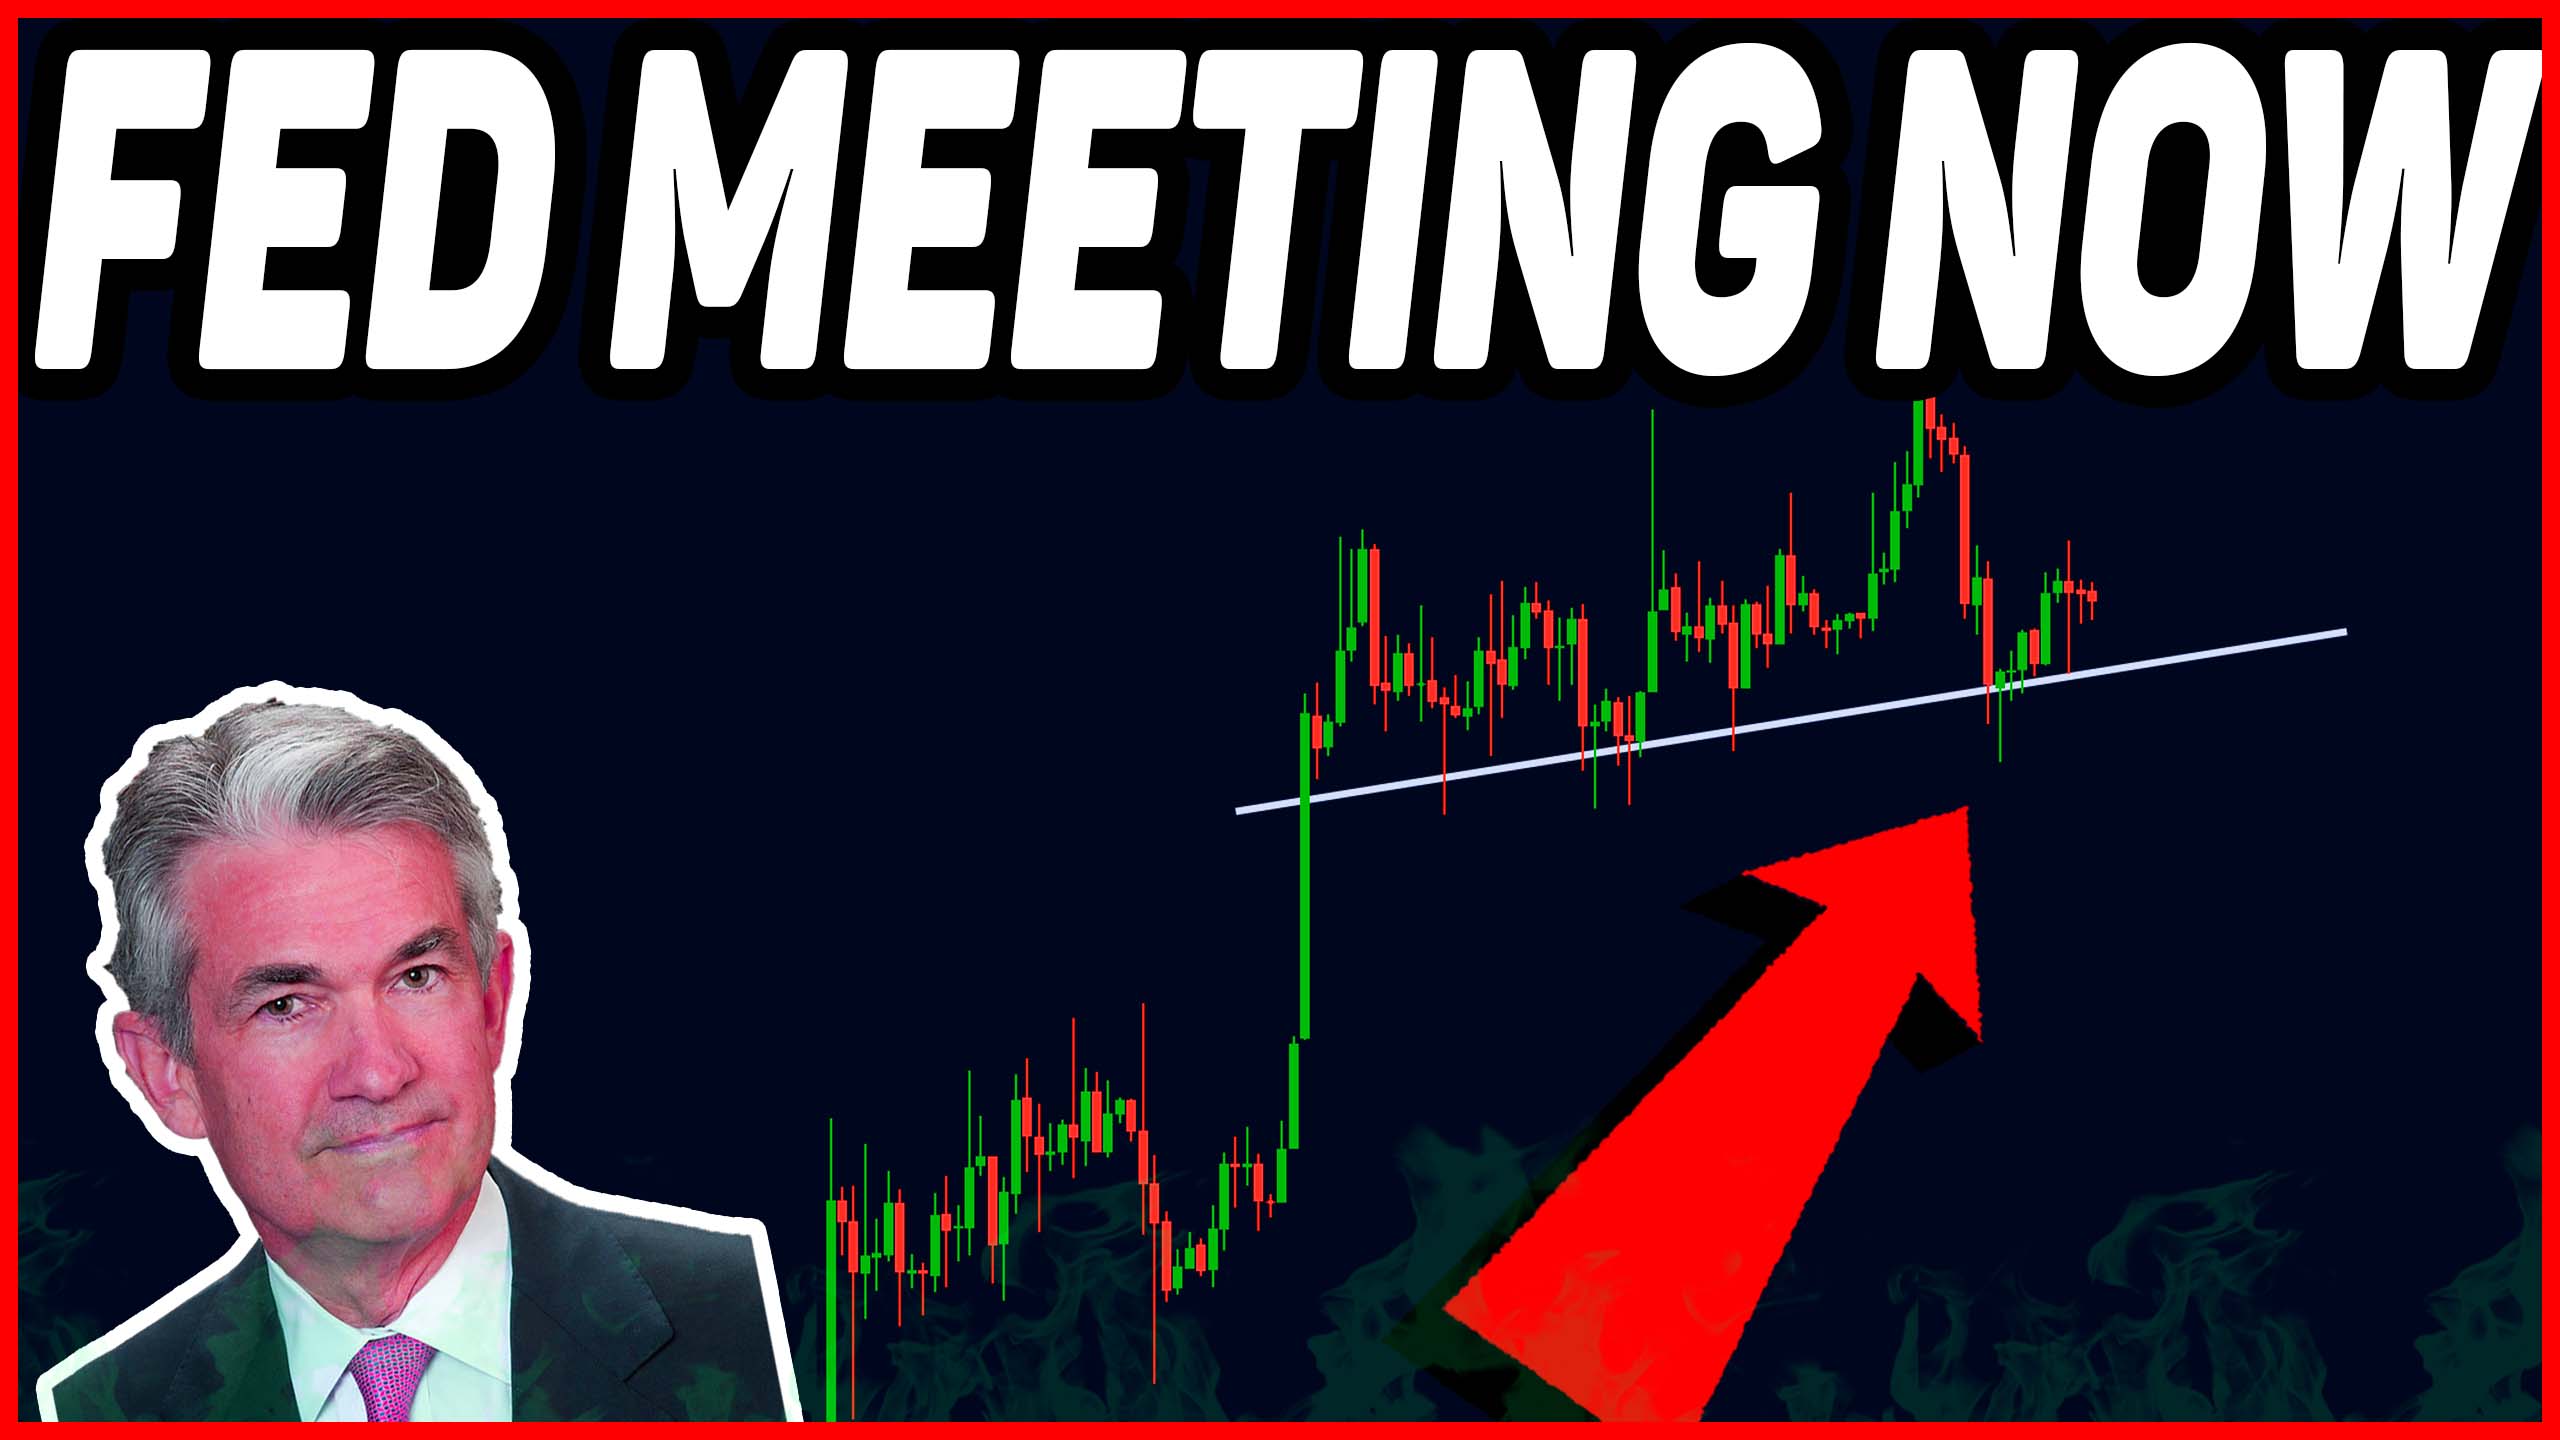 Fed Meeting today meeting: 7th February 2023